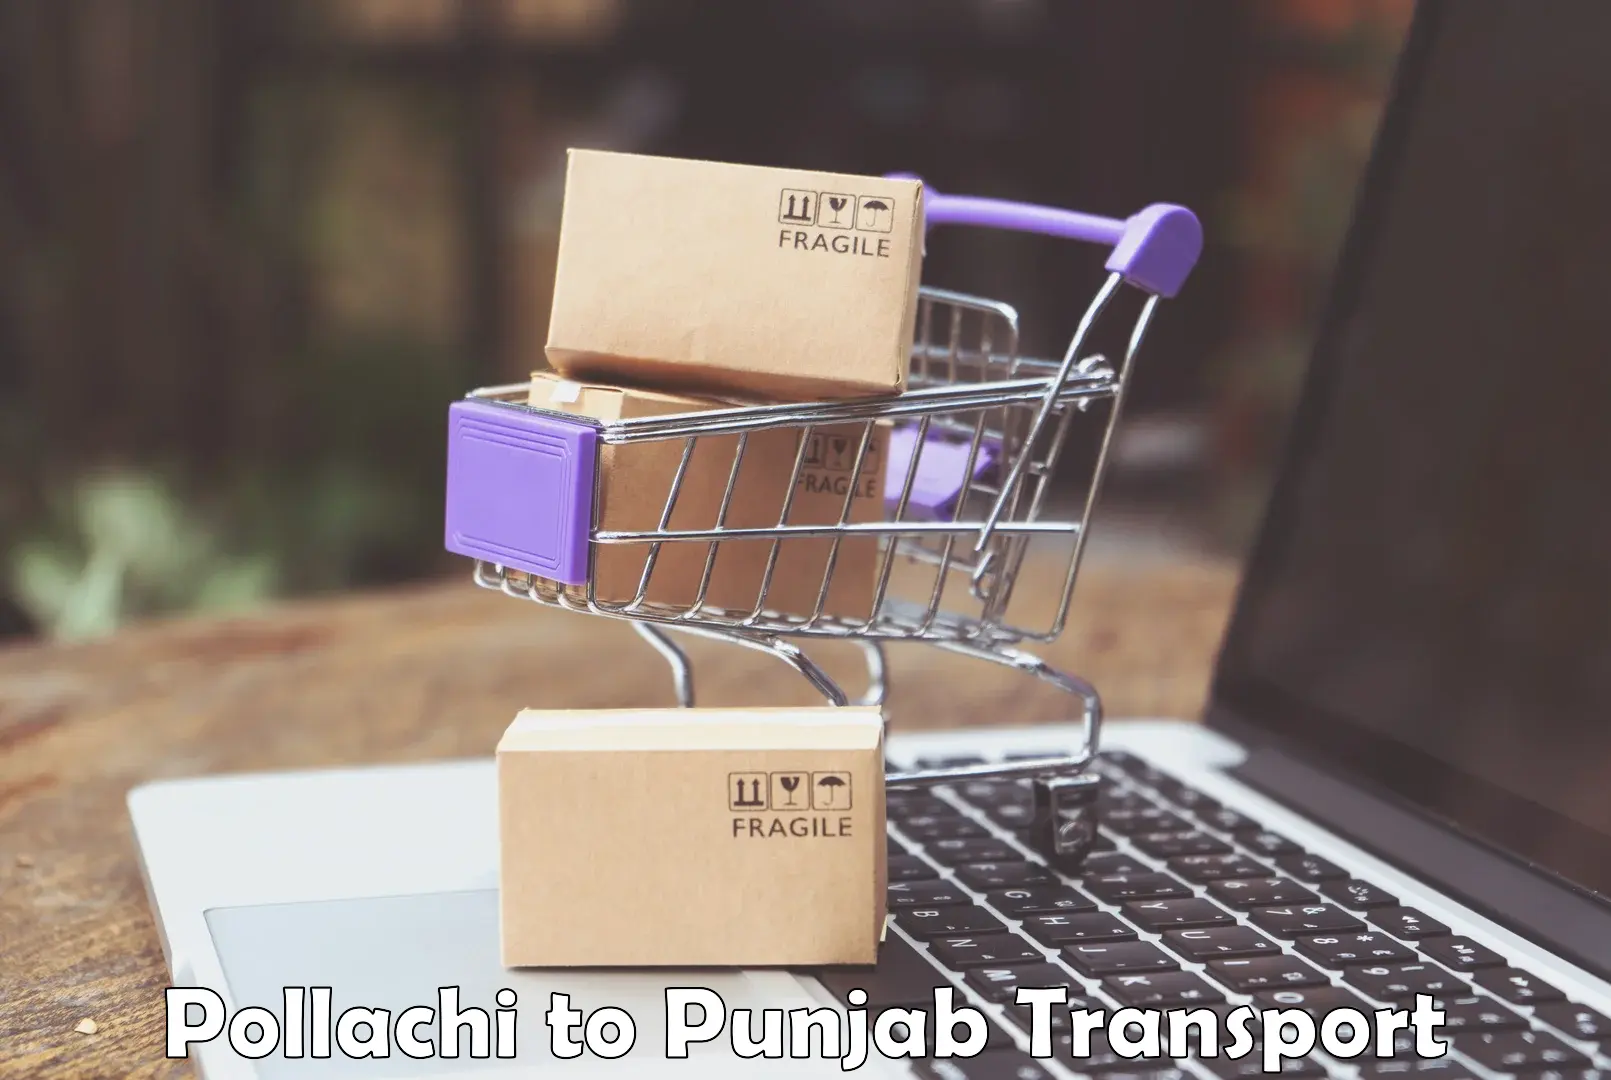 Online transport service Pollachi to Mohali